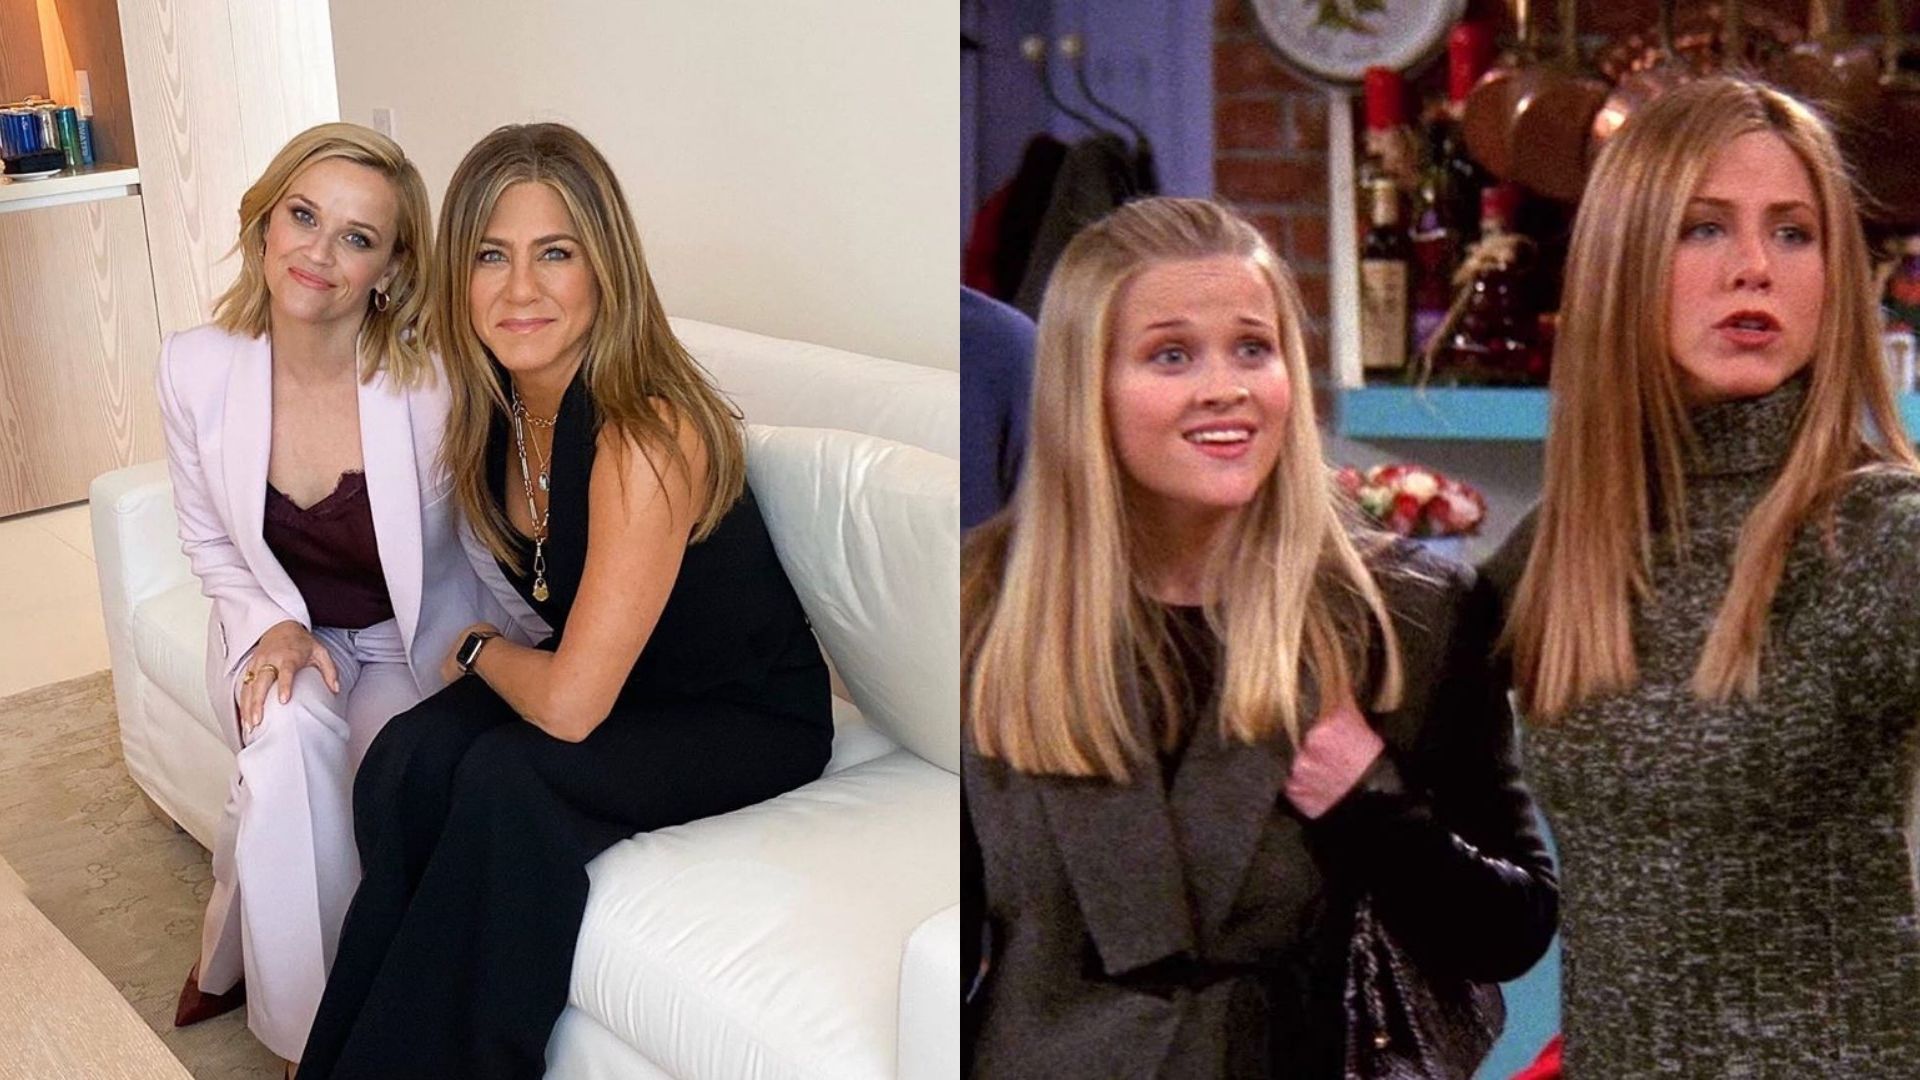 What she wore: Reese Witherspoon and Jennifer Aniston combine